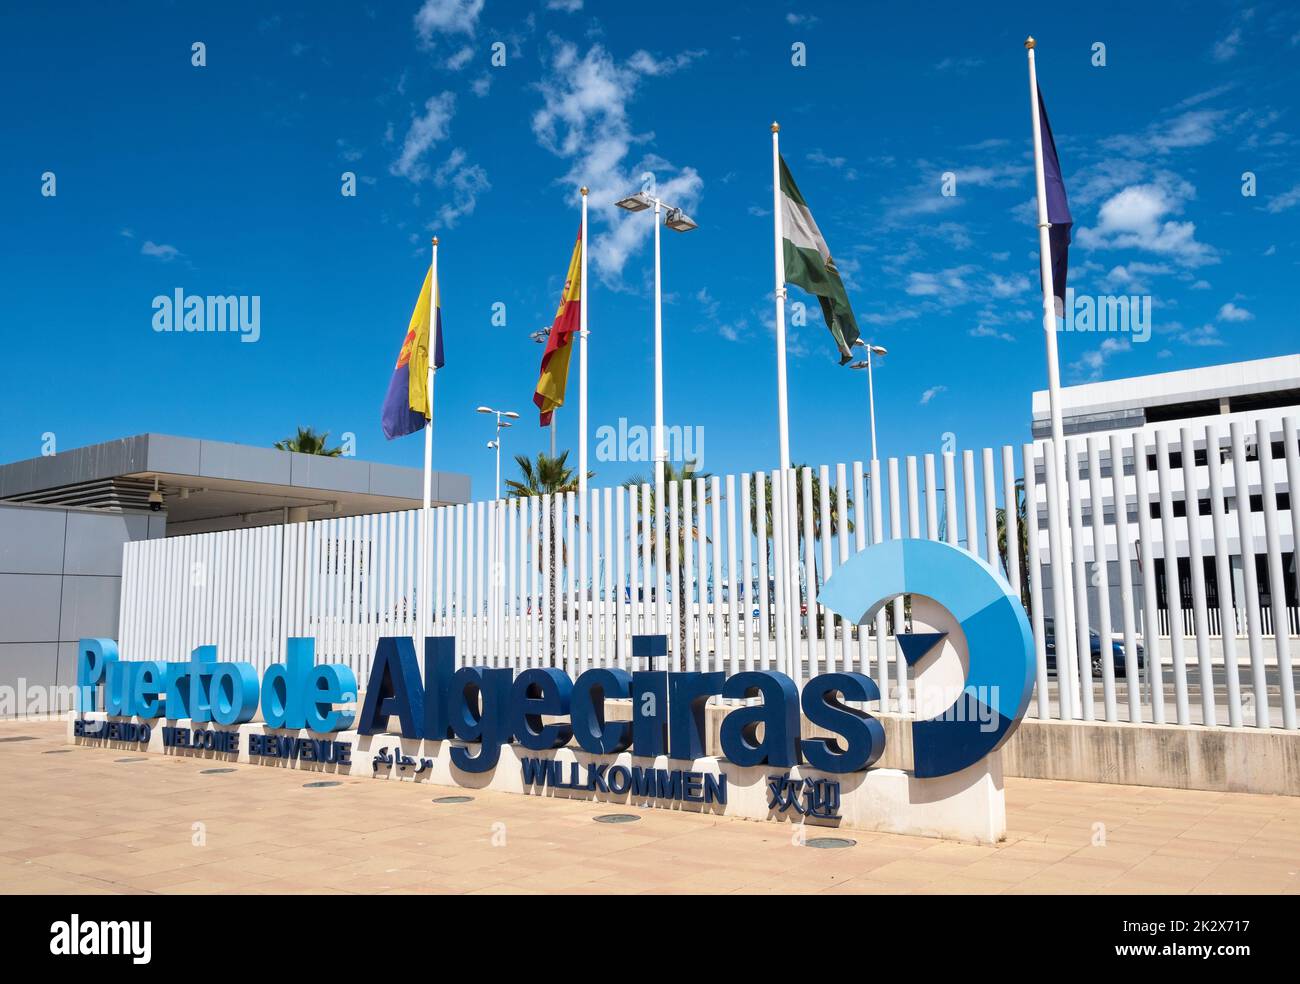 The welcome to Puerto de Algeciras (Port of Algeciras) logo sign with flag poles behind, which is situated near the main foot passenger entrance. Stock Photo